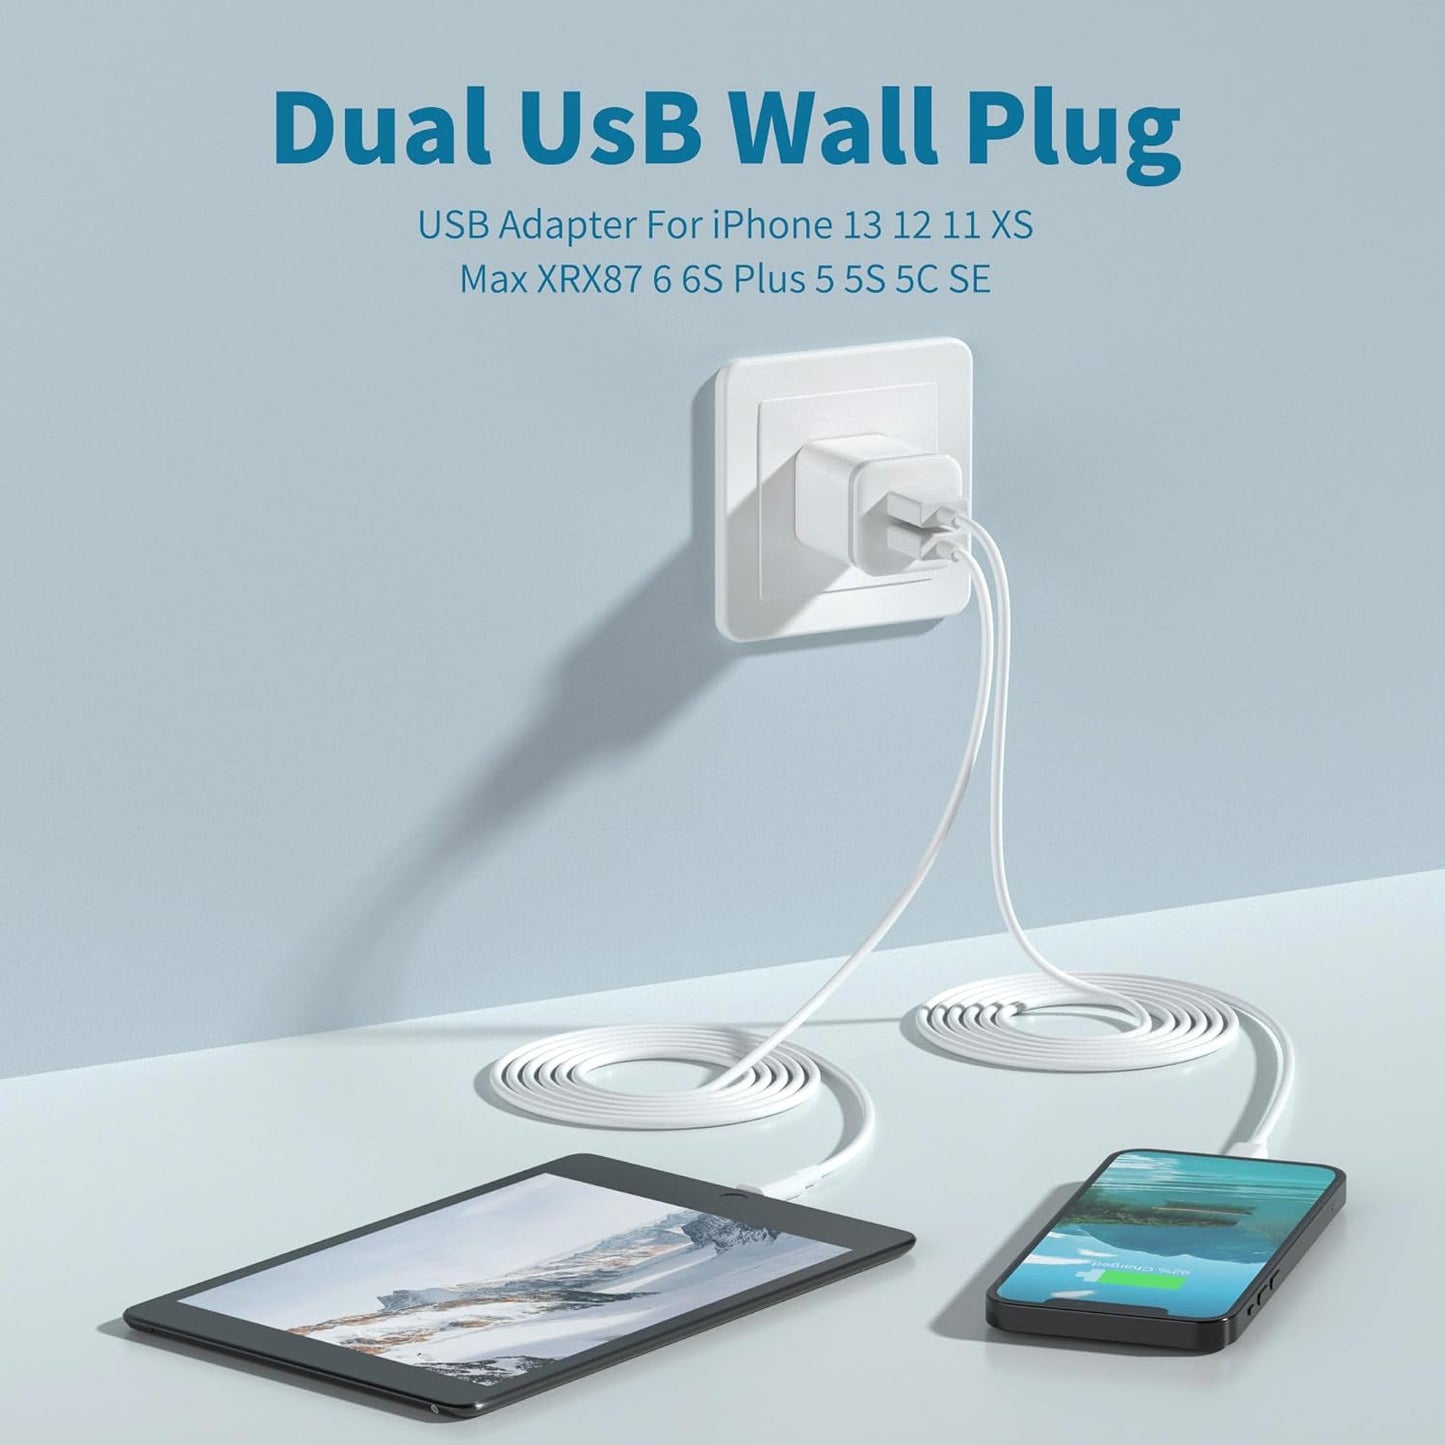 USB Wall Charger 2.1A/5V Dual Port USB Cube Power Adapter Charger + Installation